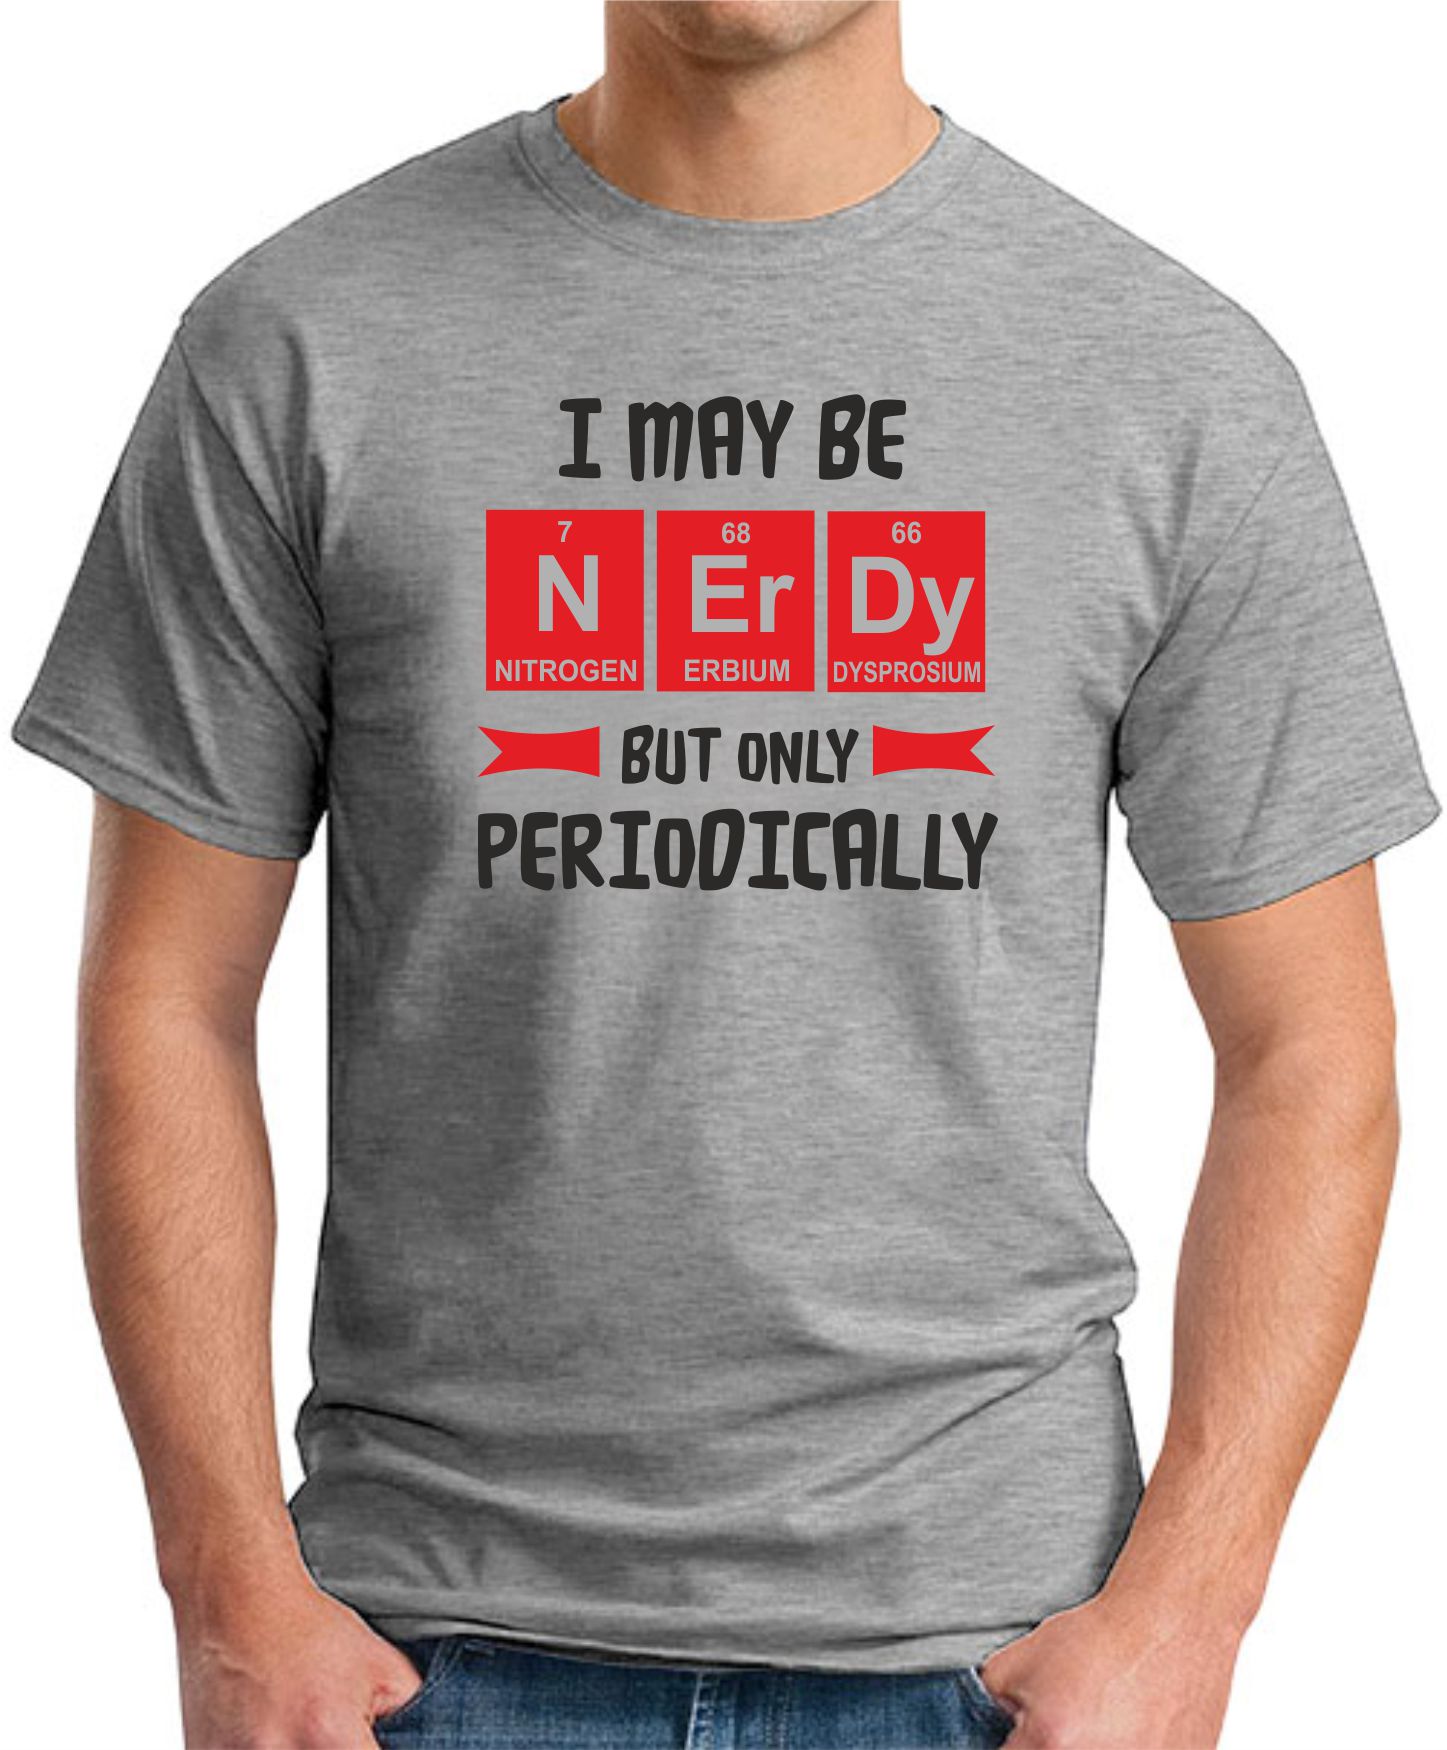 I MAY BE NERDY BUT ONLY PERIODICALLY T-SHIRT - GeekyTees